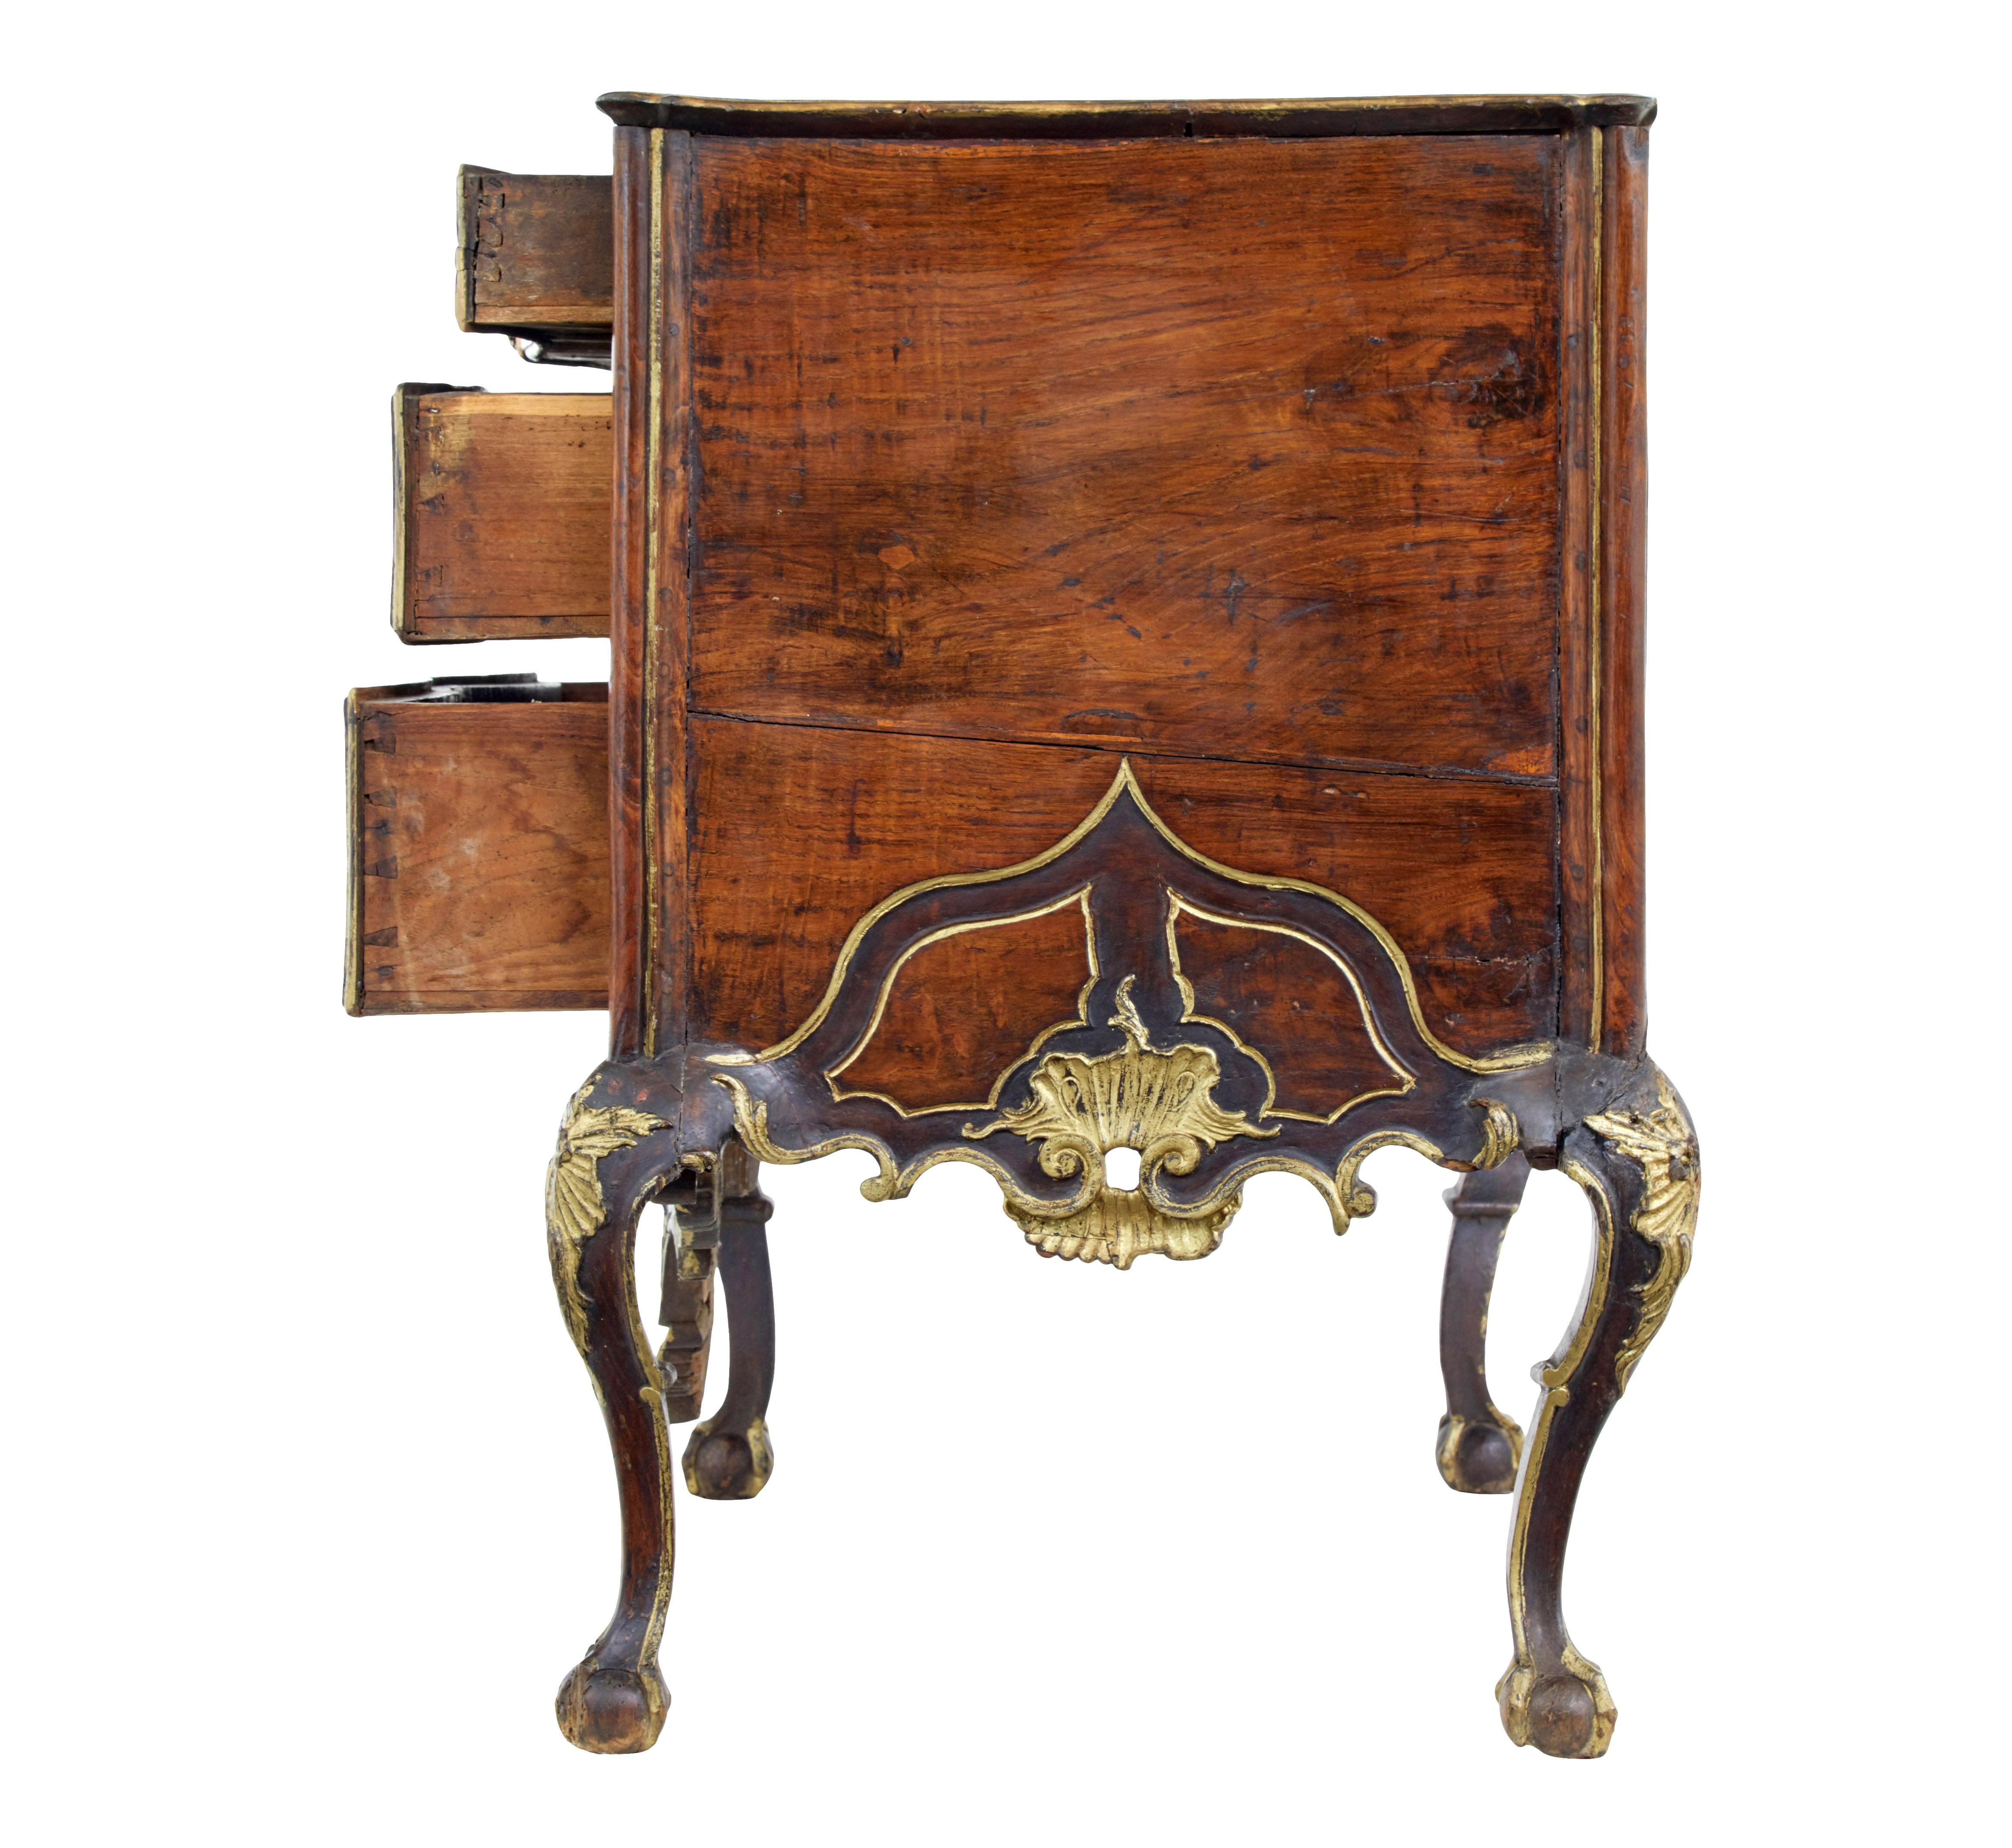 Rococo Revival Portuguese 18th century carved walnut and gilt chest of drawers For Sale